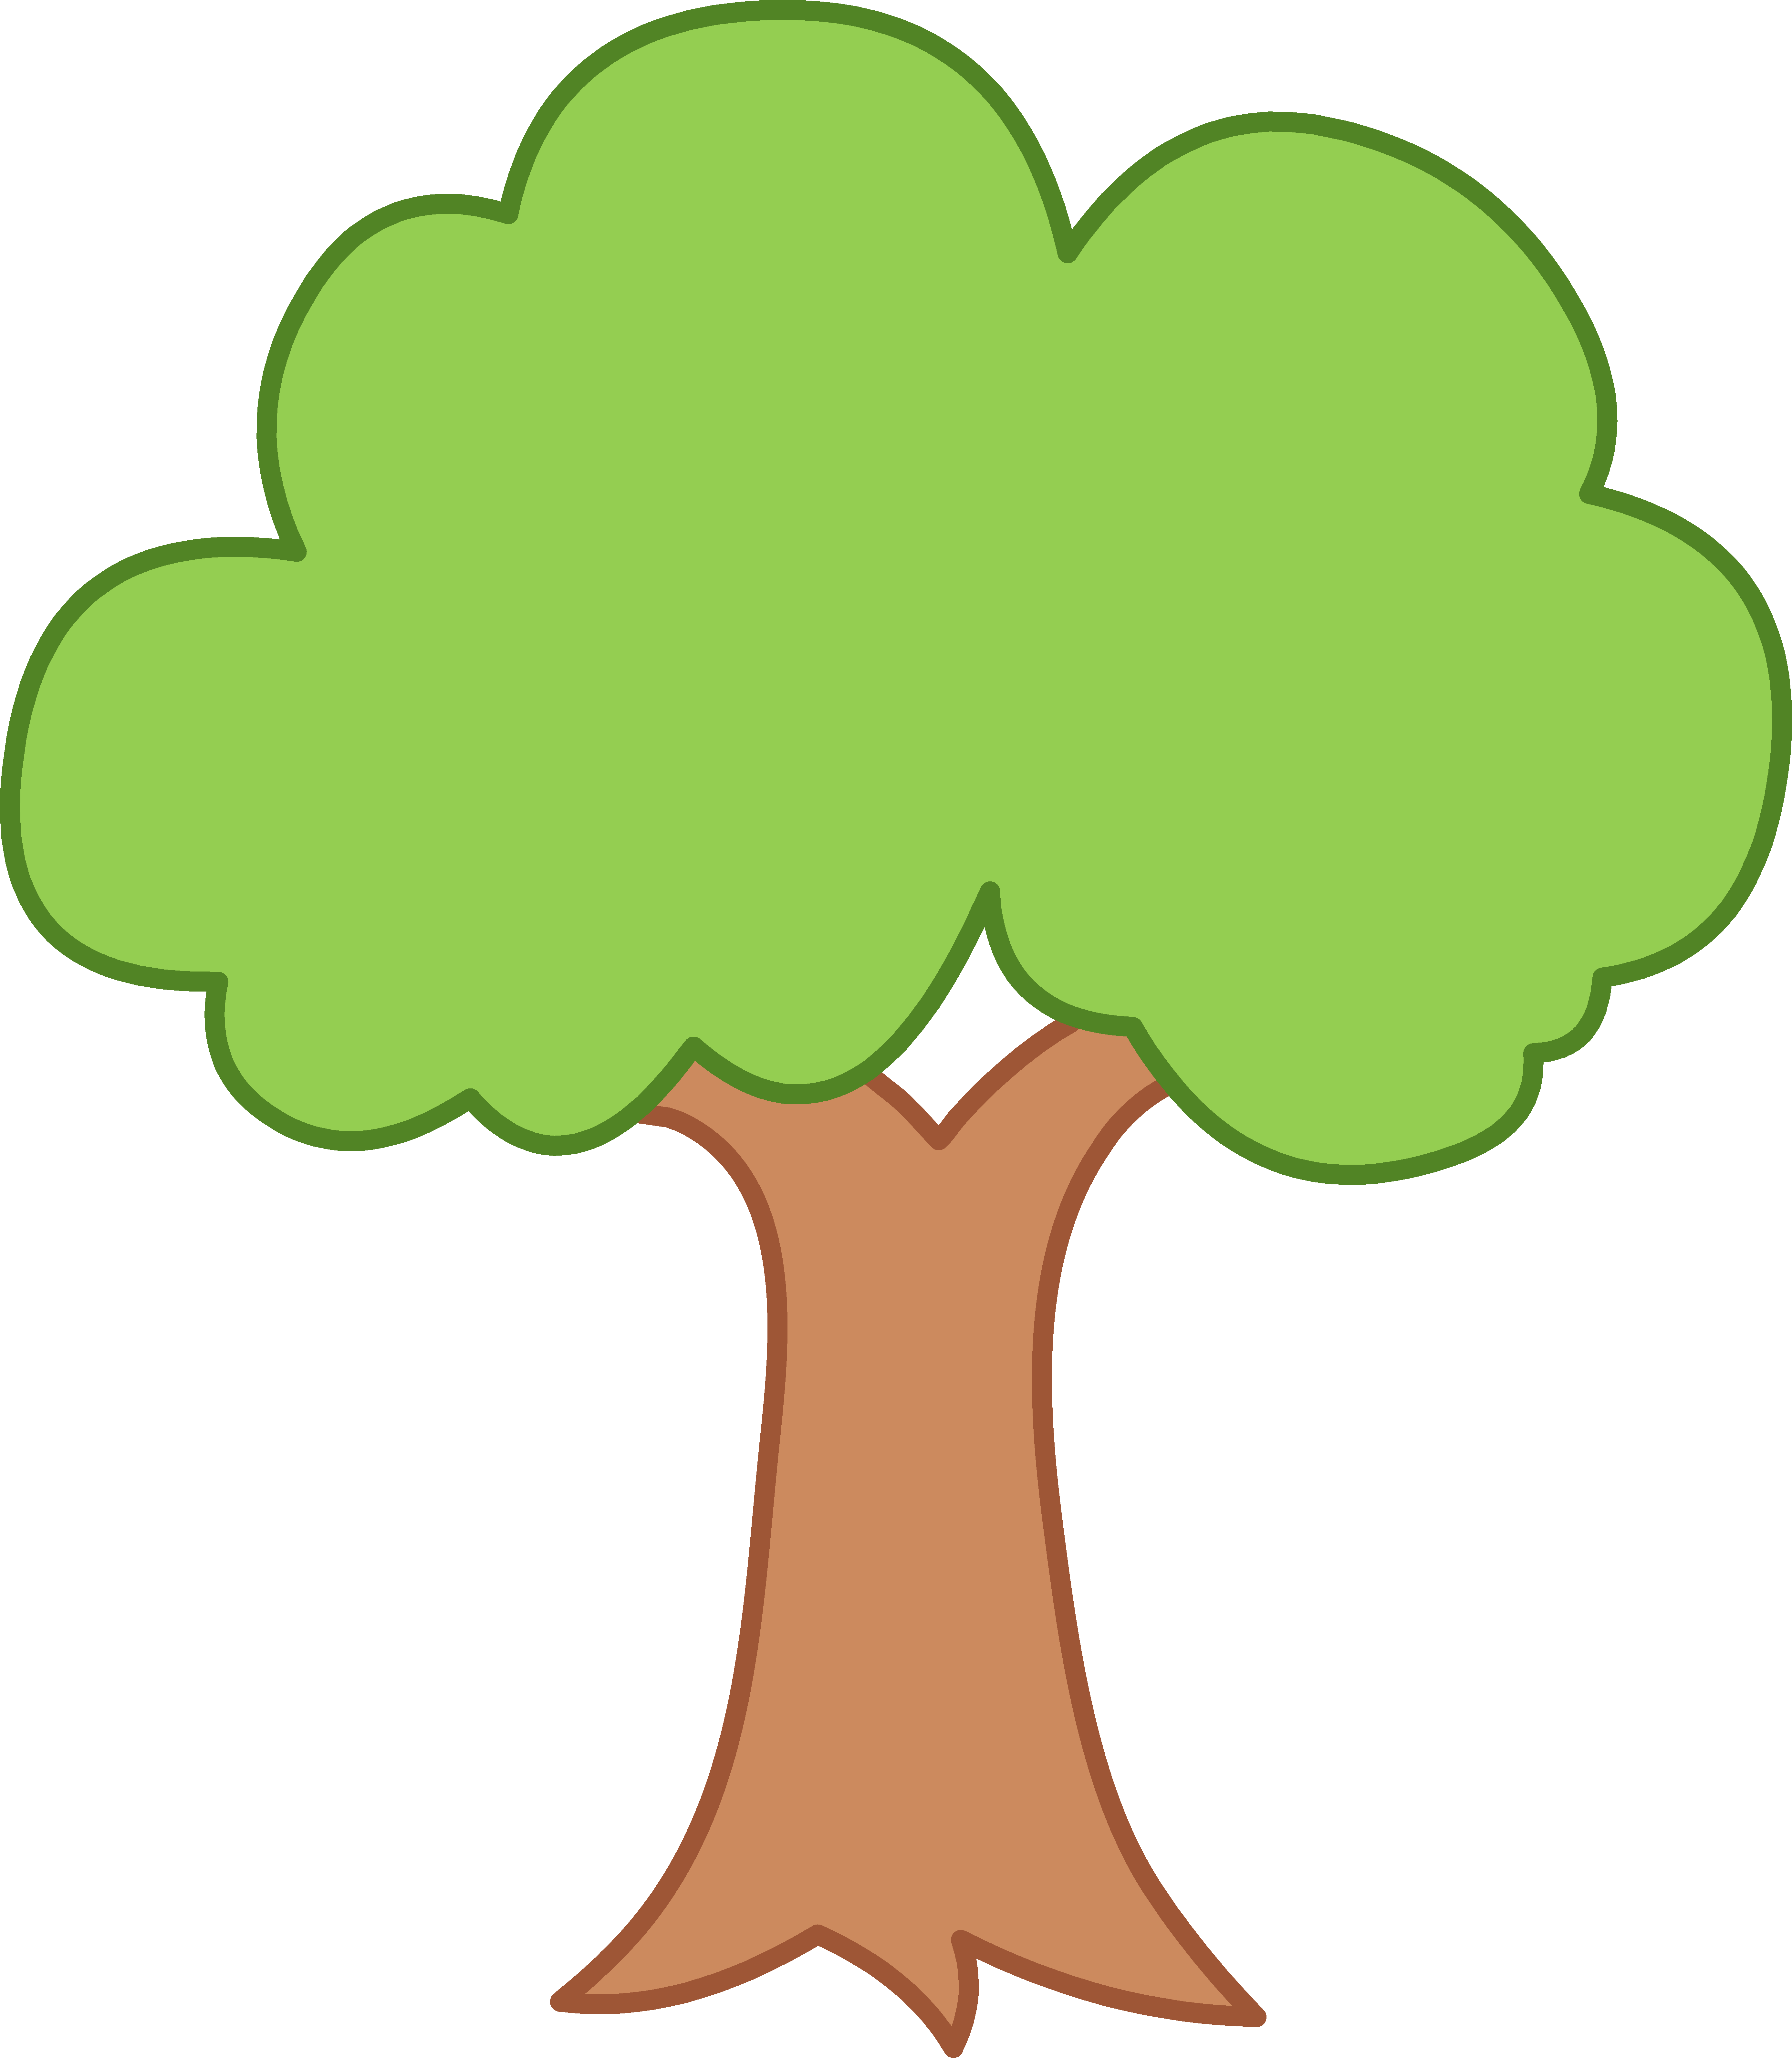 Tree Clip Art Background | Clipart Panda - Free Clipart Images